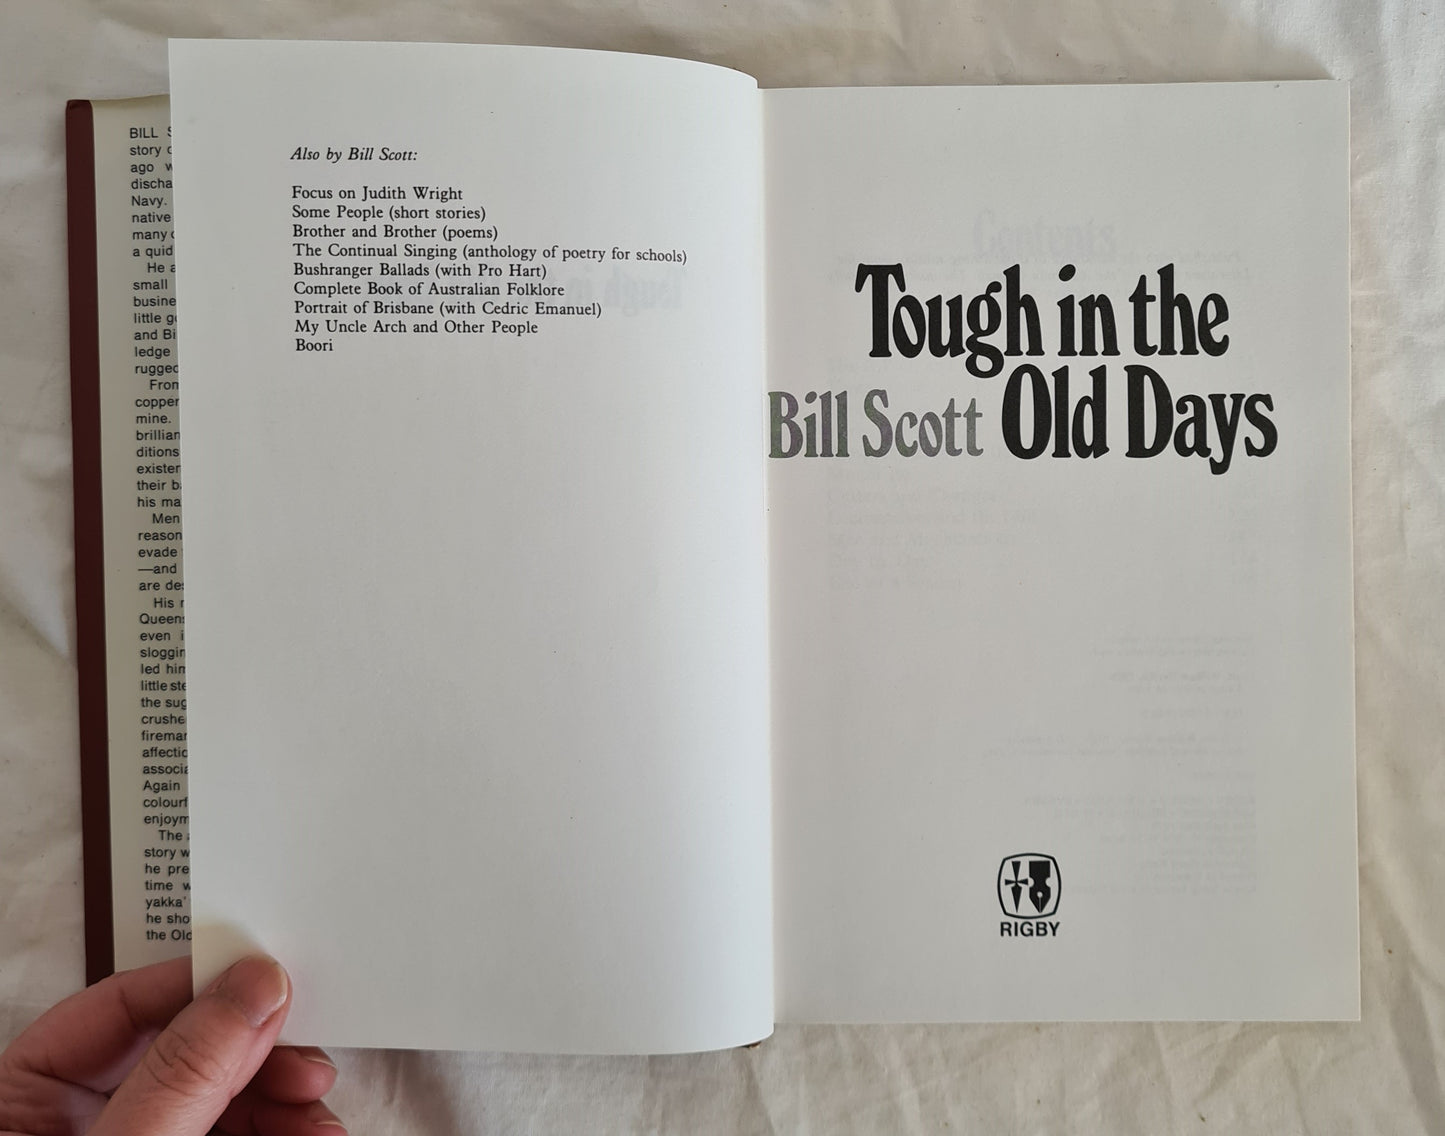 Tough in the Old Days by Bill Scott